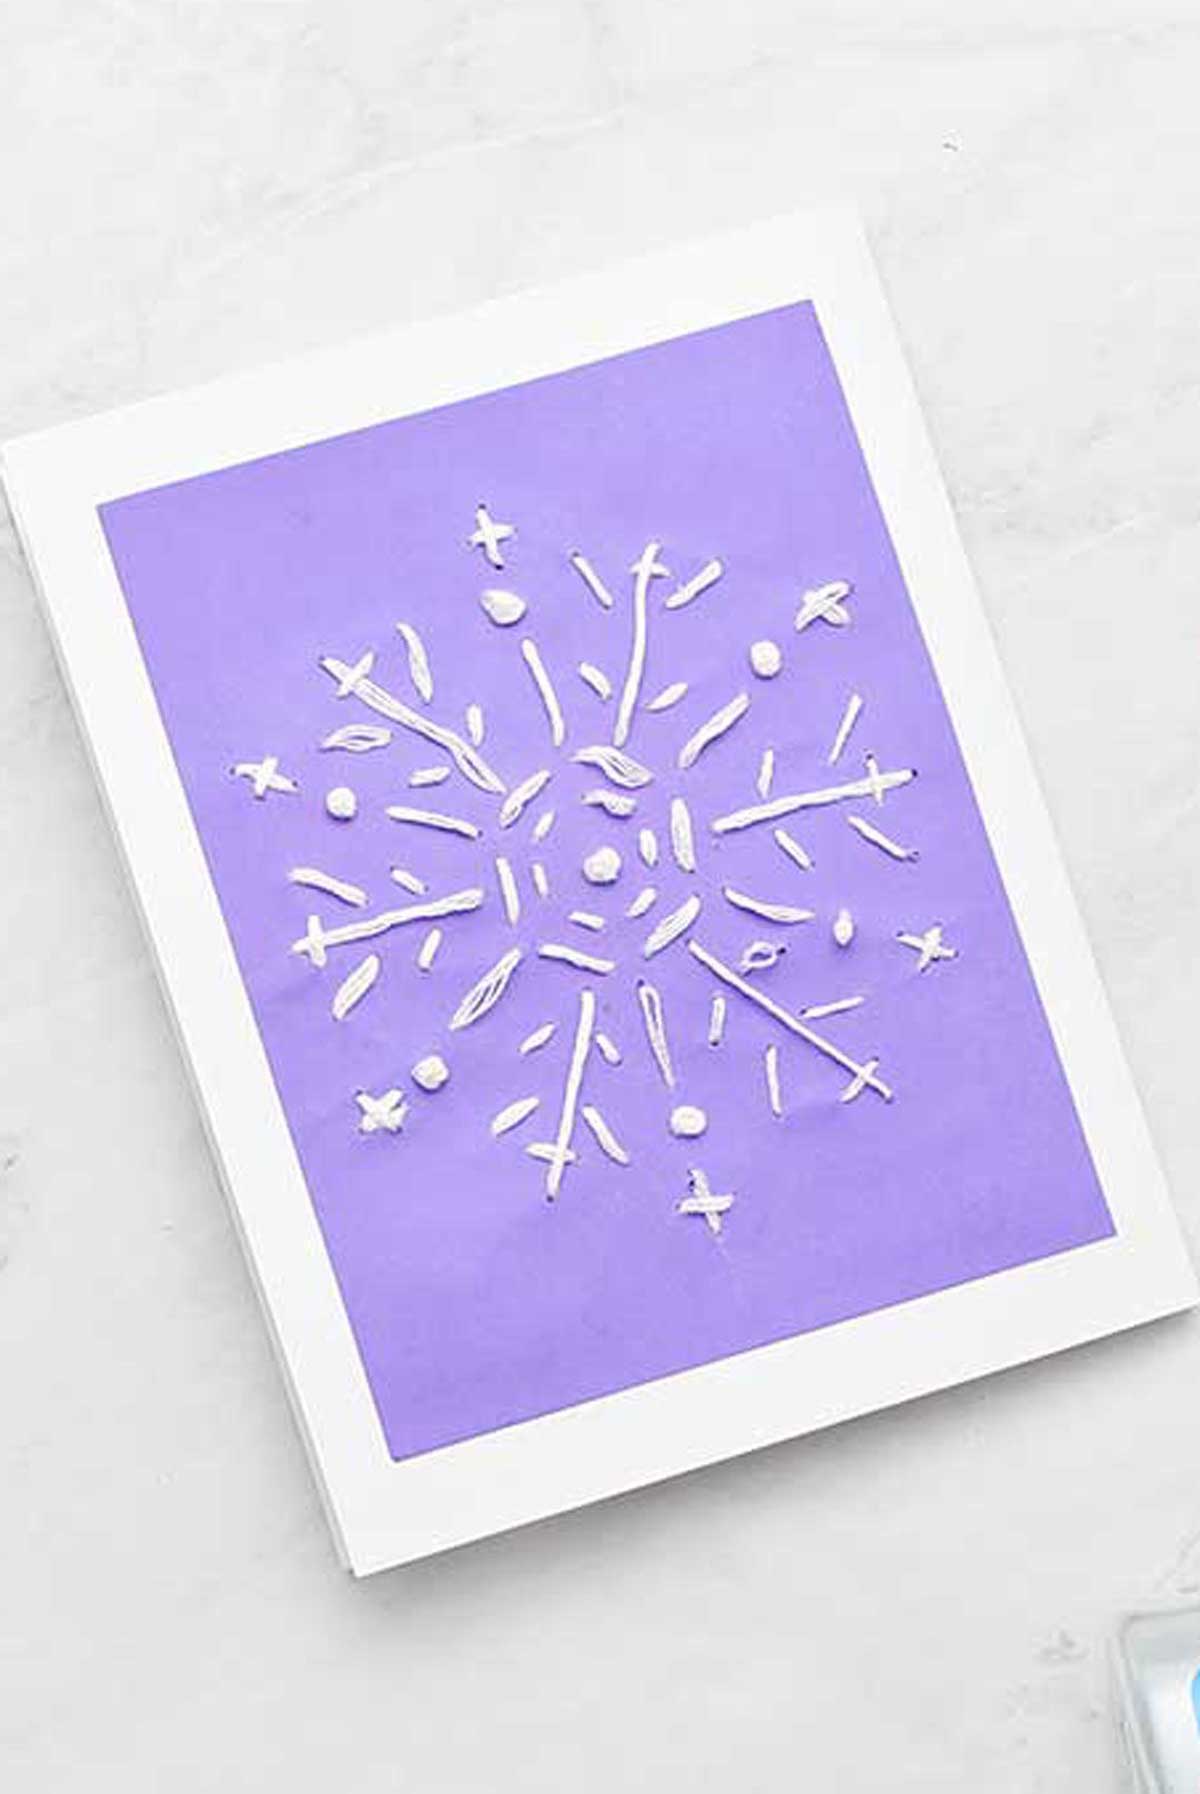 Completed snowflake embroidered greeting card with embroidery floss, glue and scissors nearby.